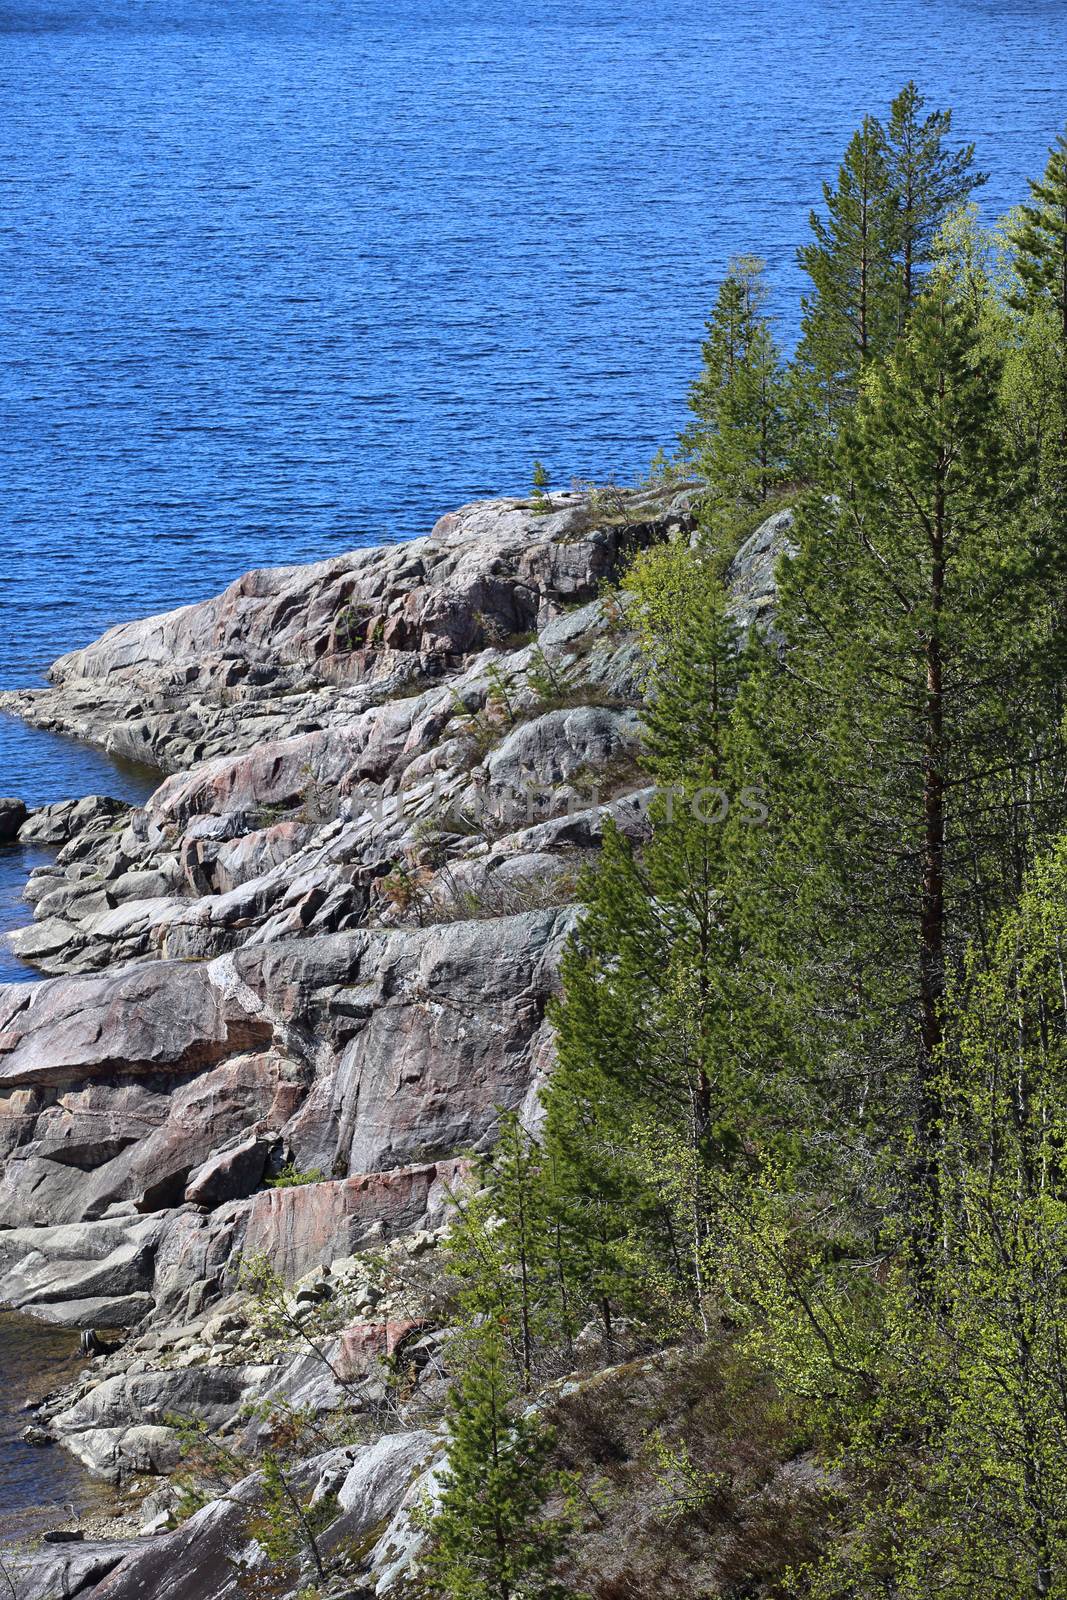 Sea shore with rocks and firs, summer Norway landscape